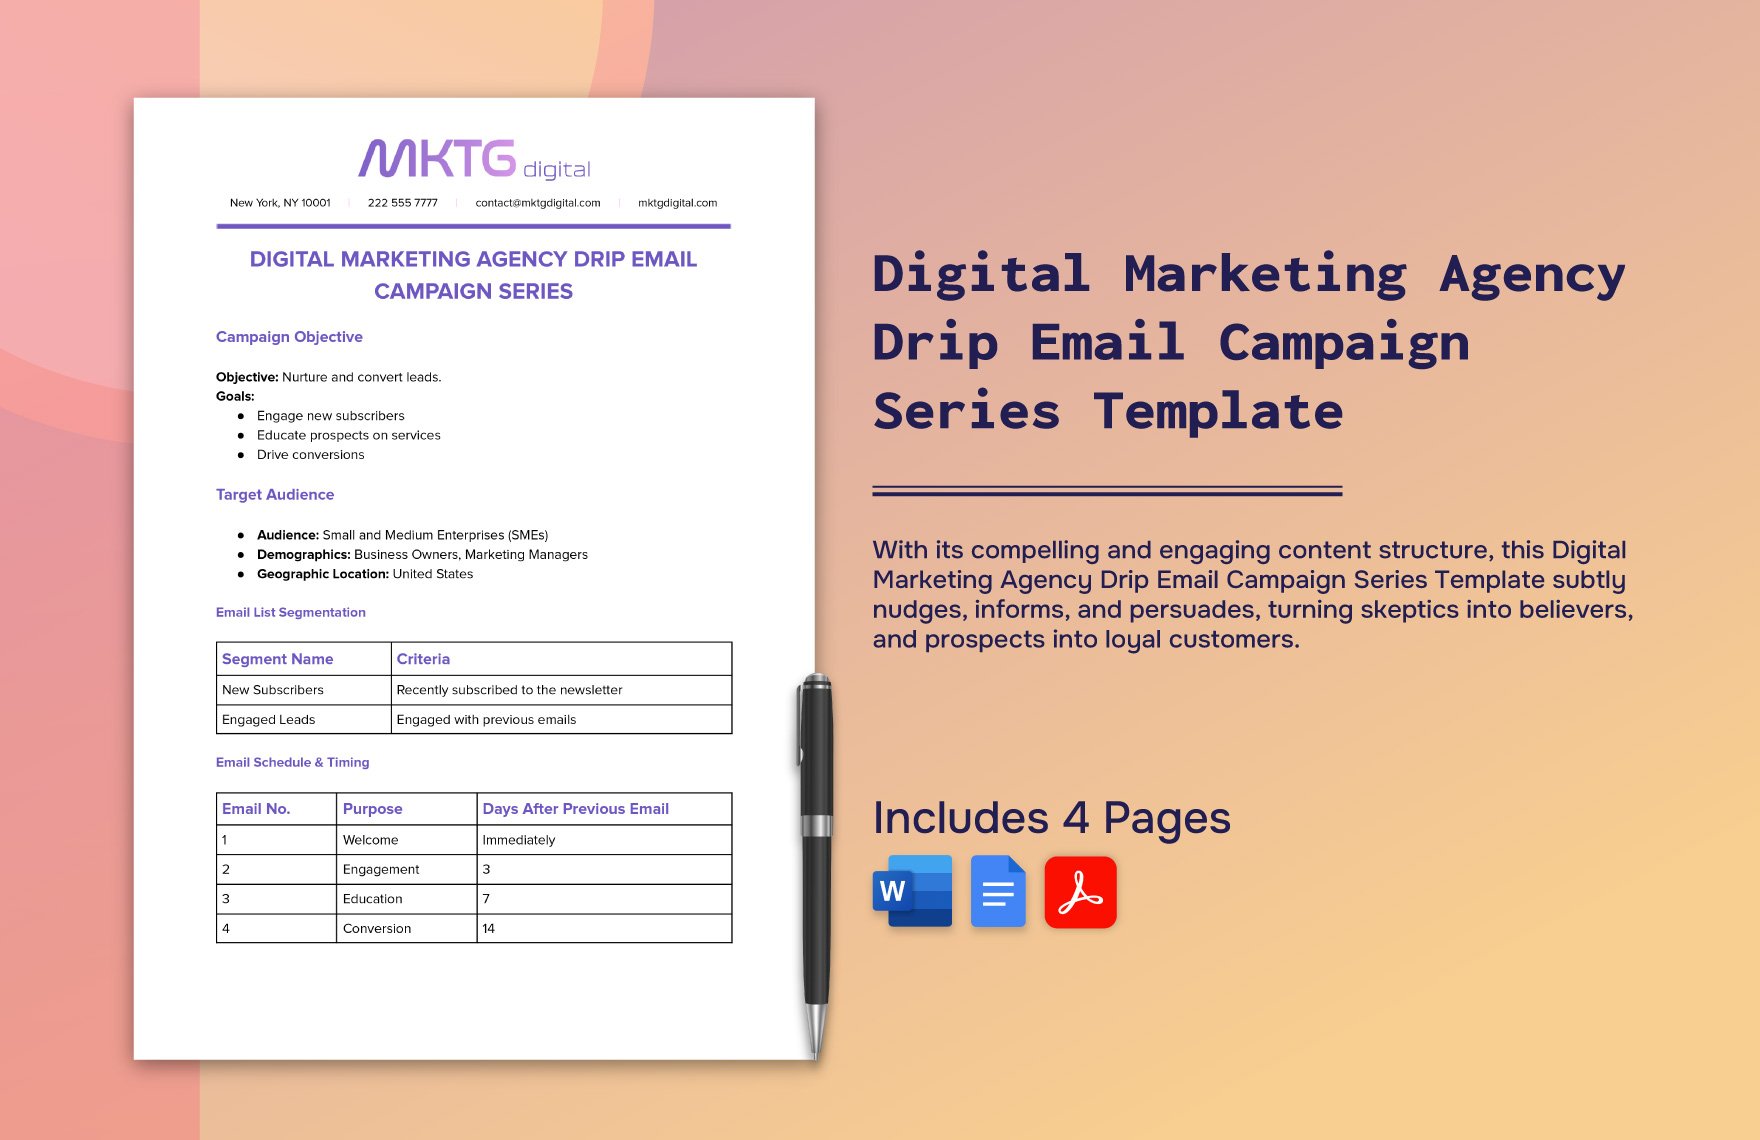 Digital Marketing Agency Drip Email Campaign Series Template